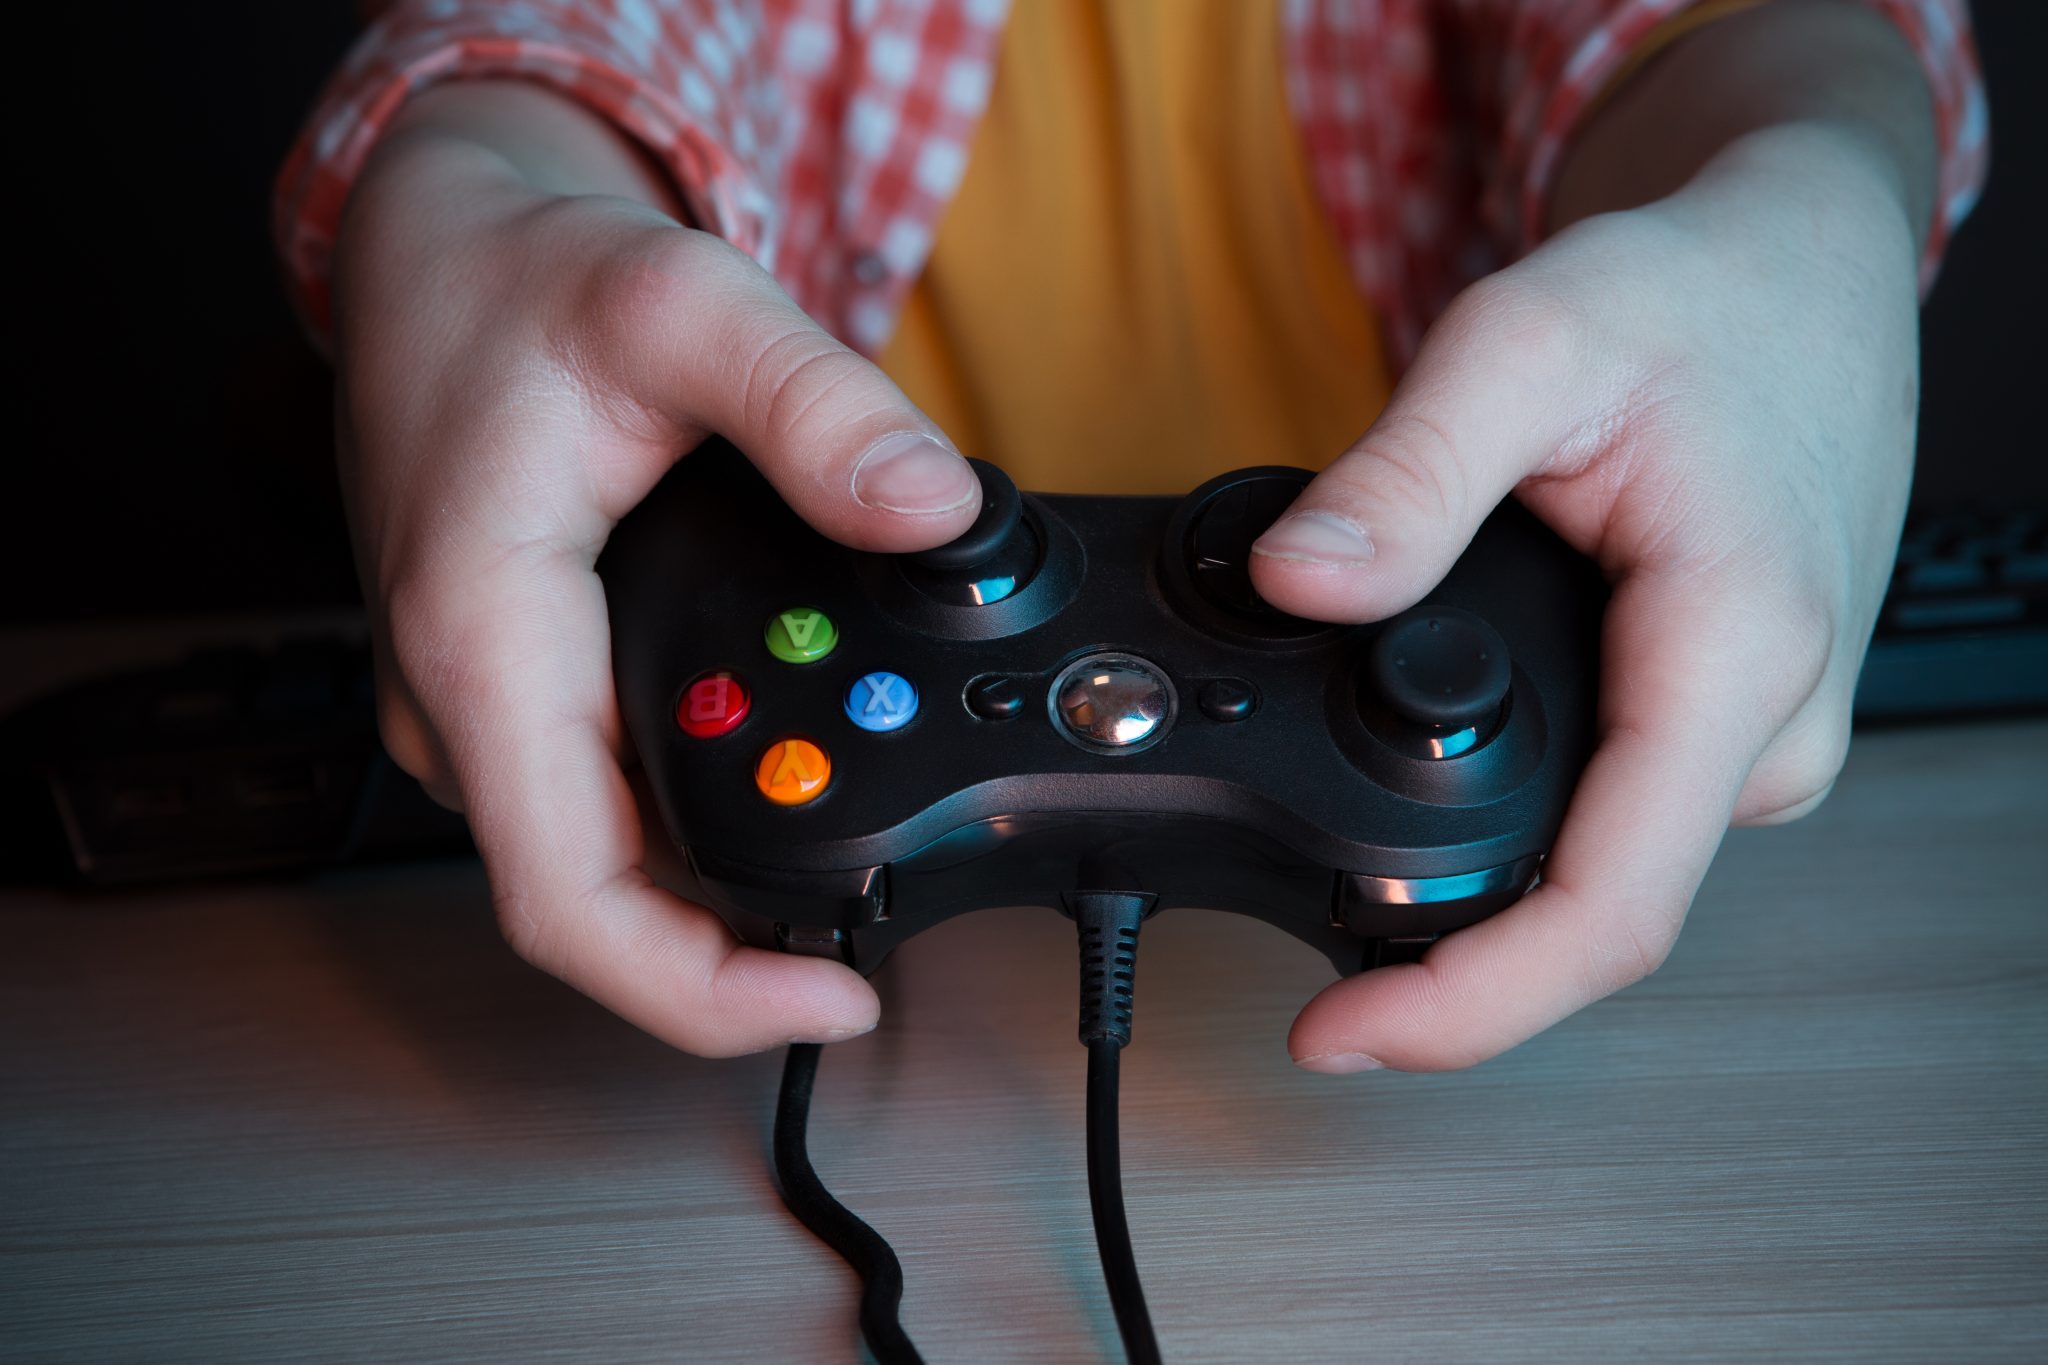 Playing Video Games May Help You Score Higher on Tests